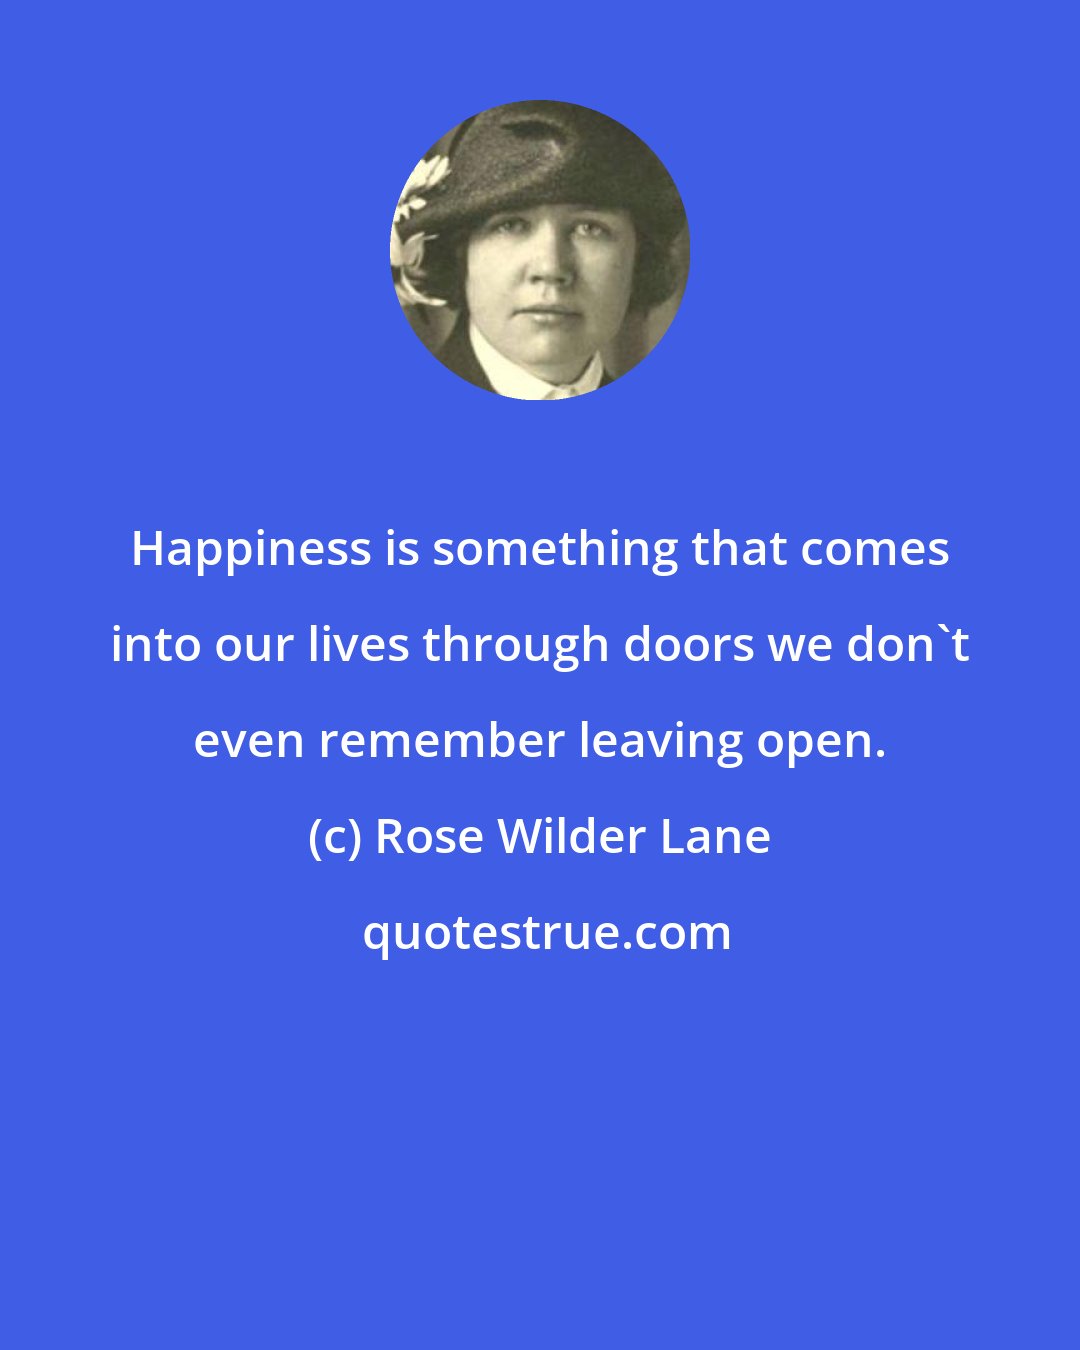 Rose Wilder Lane: Happiness is something that comes into our lives through doors we don't even remember leaving open.